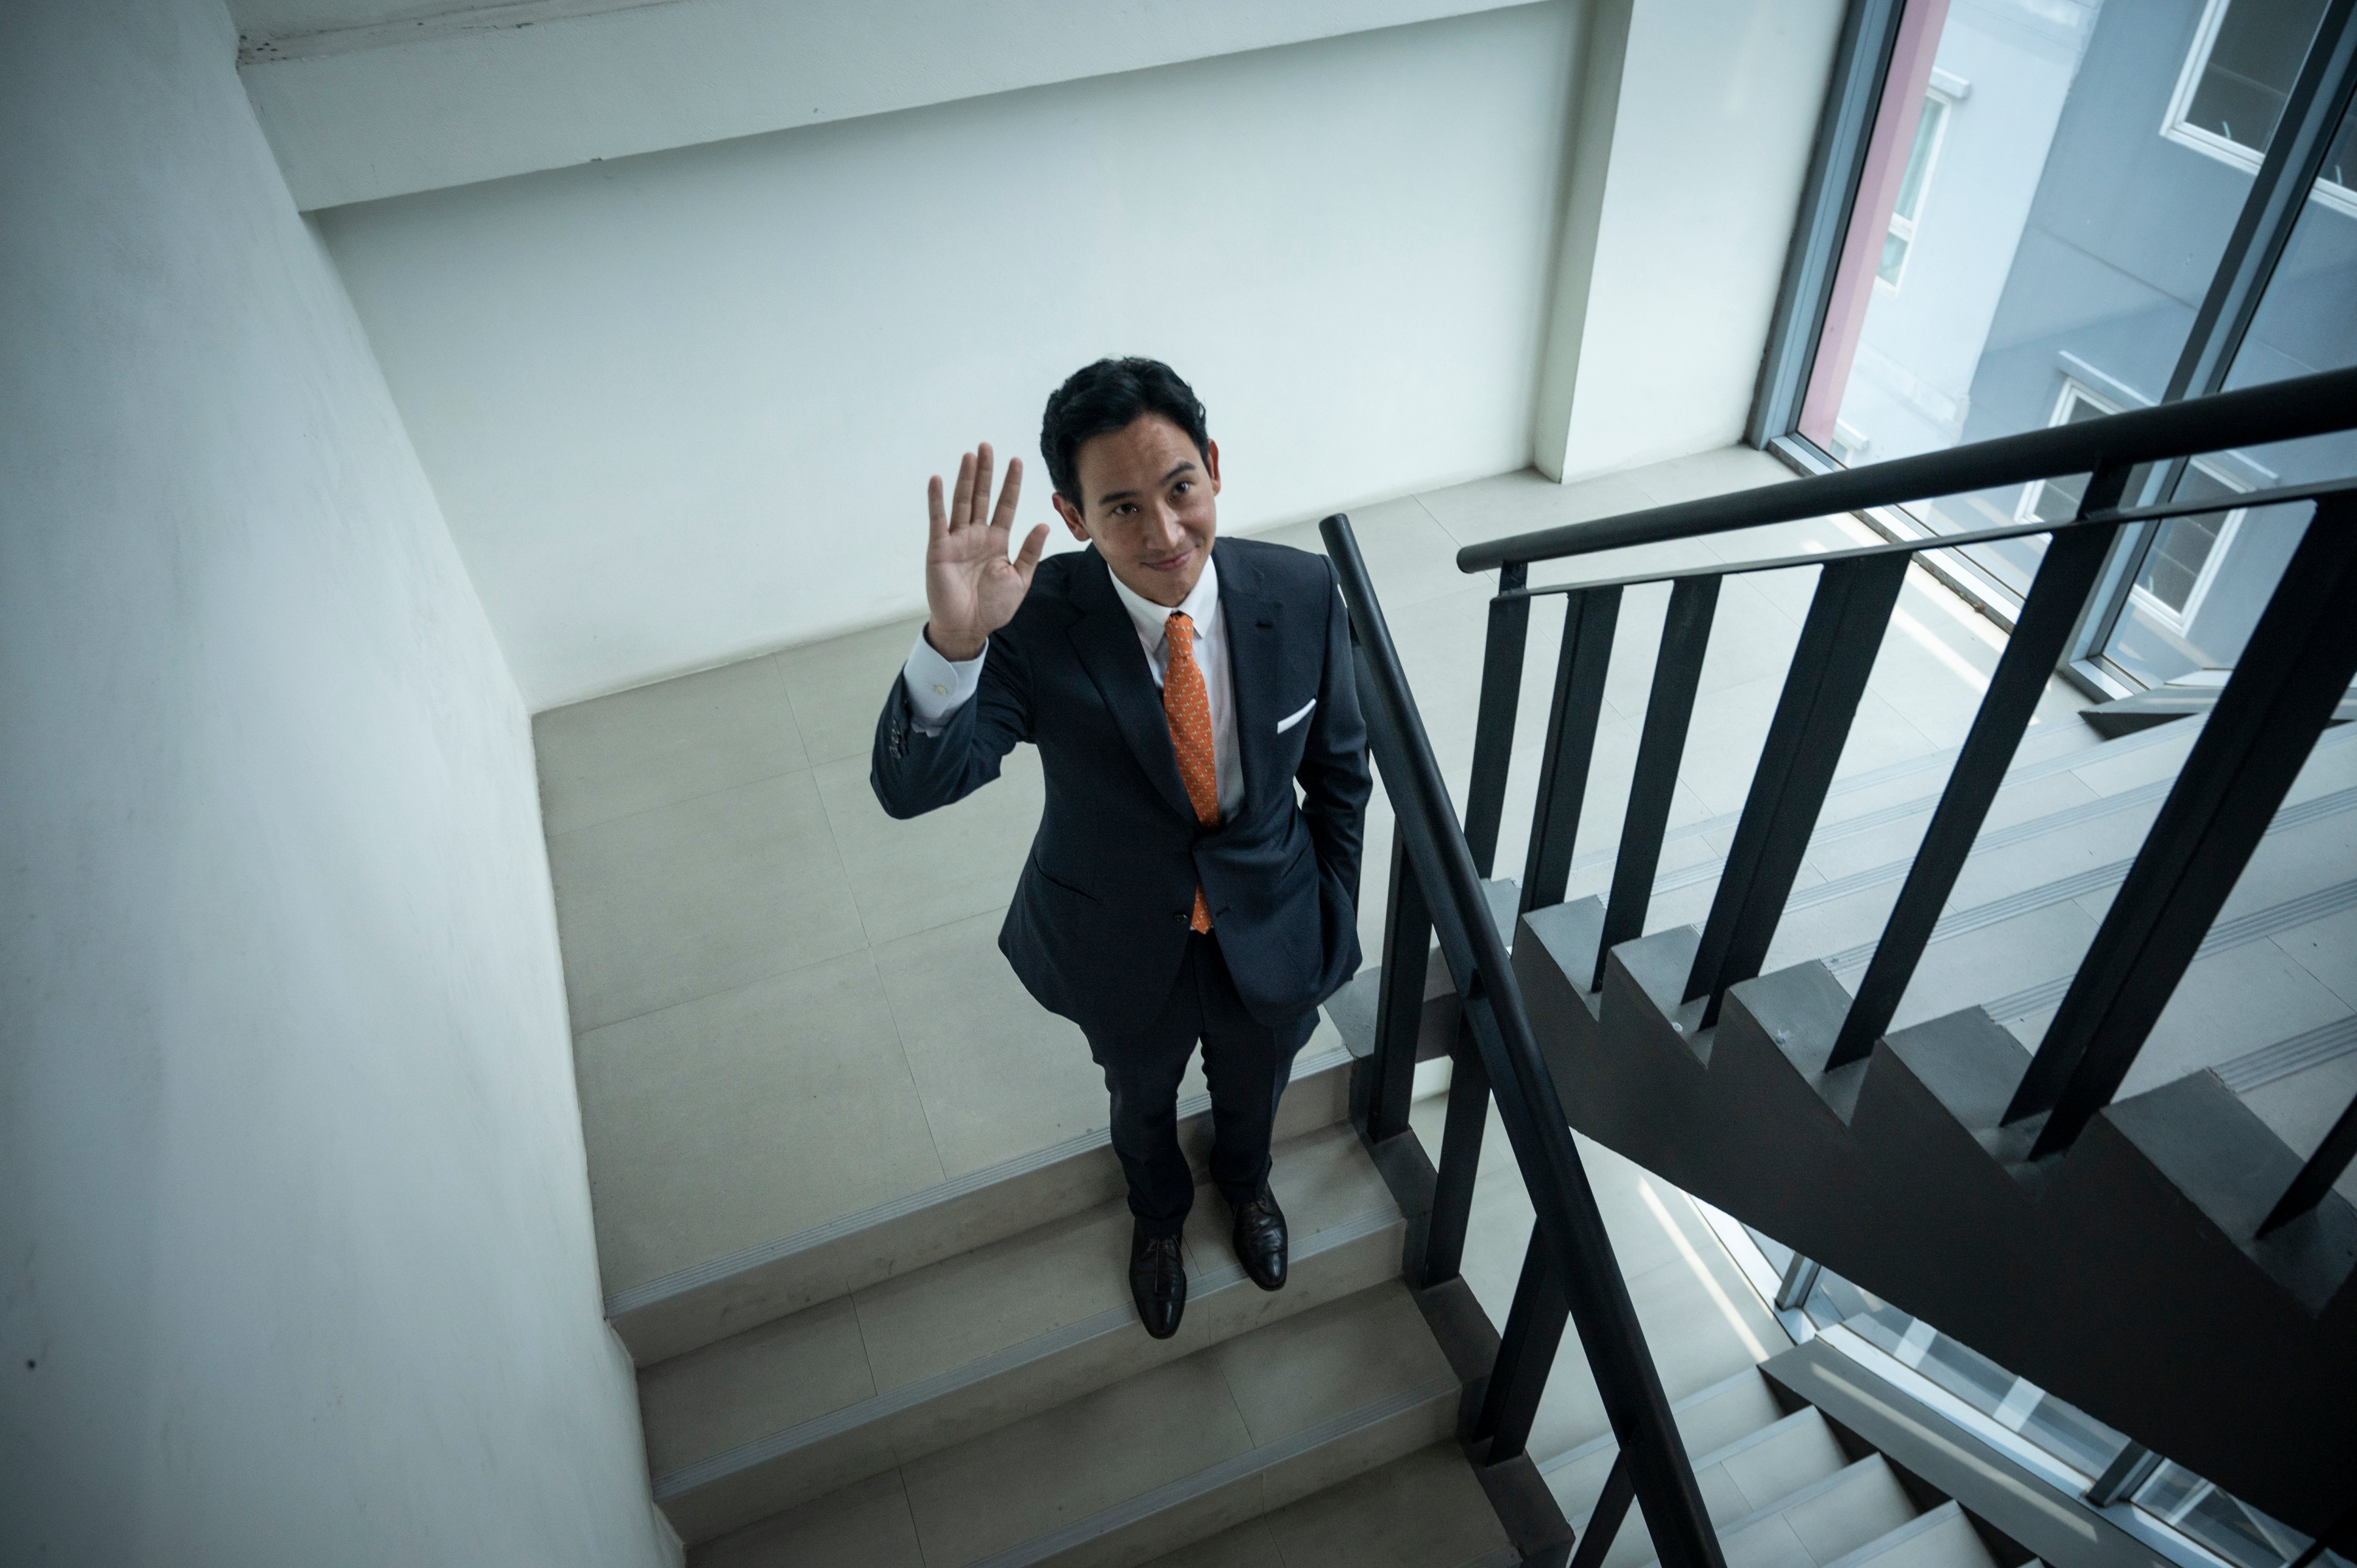 Pita walks down a staircase at the Move Forward Party headquarters in Bangkok on May 15, 2023. (Sirachai Arunrugstichai—Getty Images)